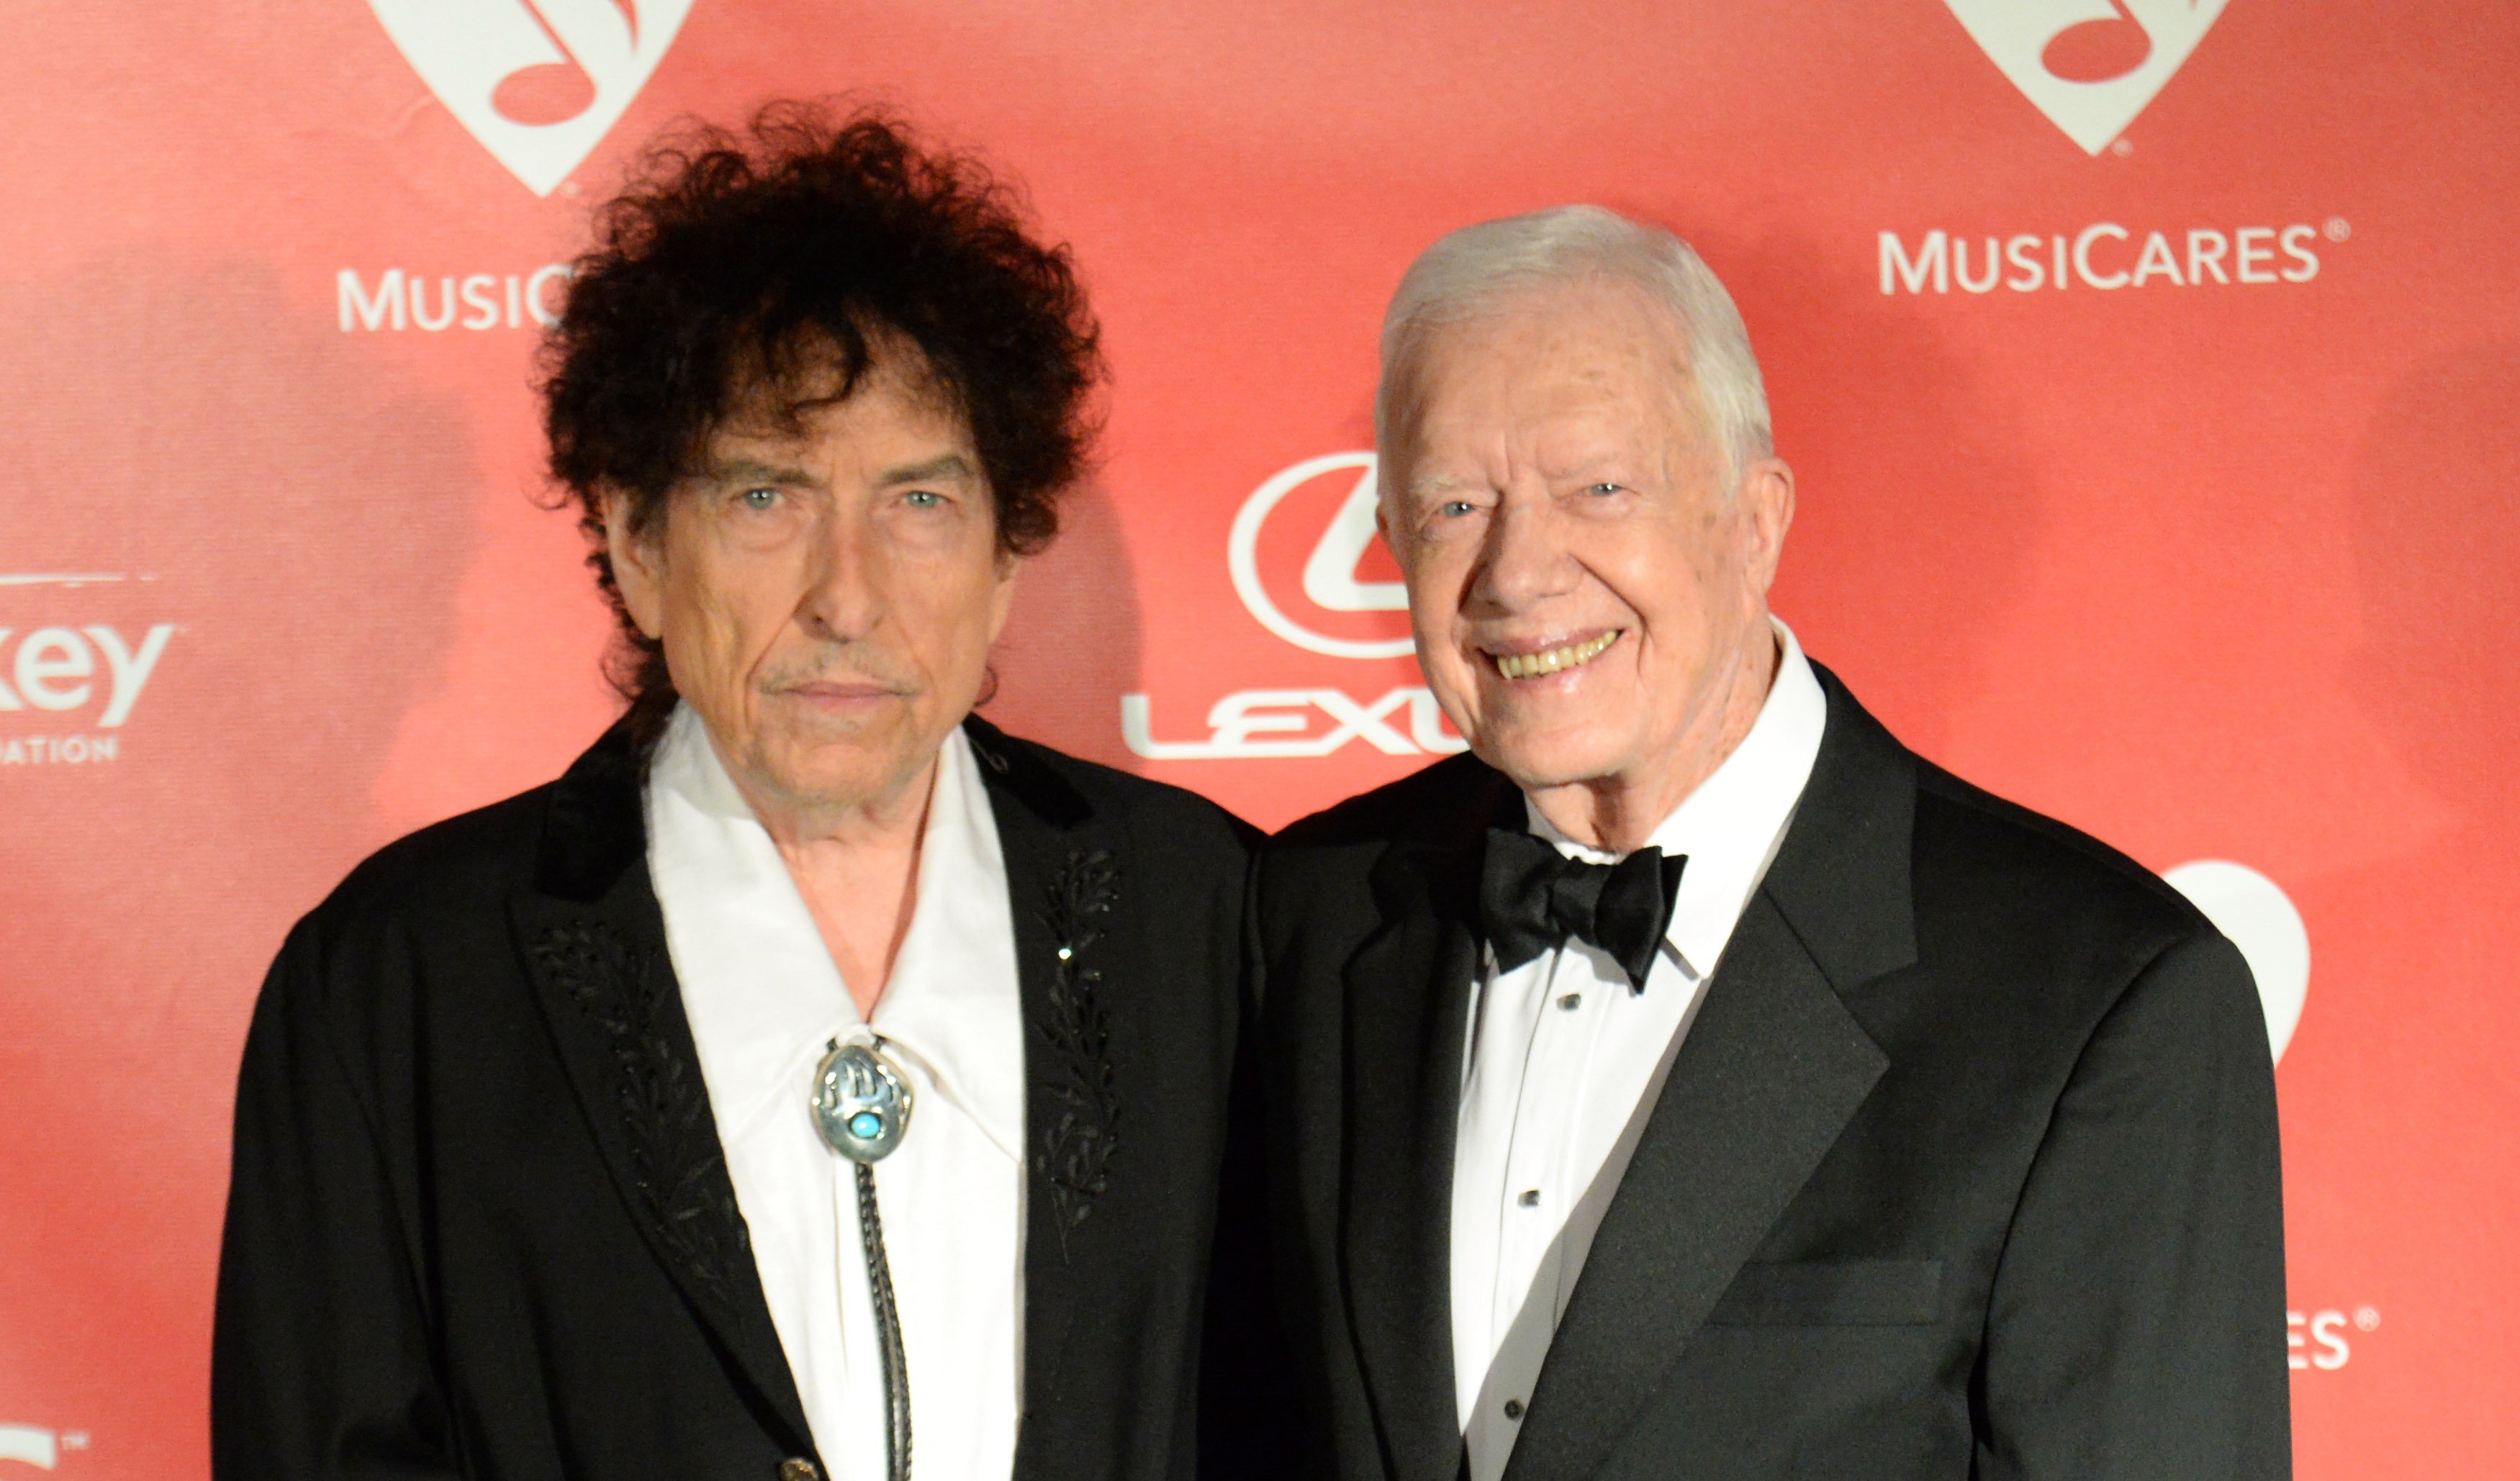 Bob Dylan Said Meeting Jimmy Carter Made Him ‘Uneasy’